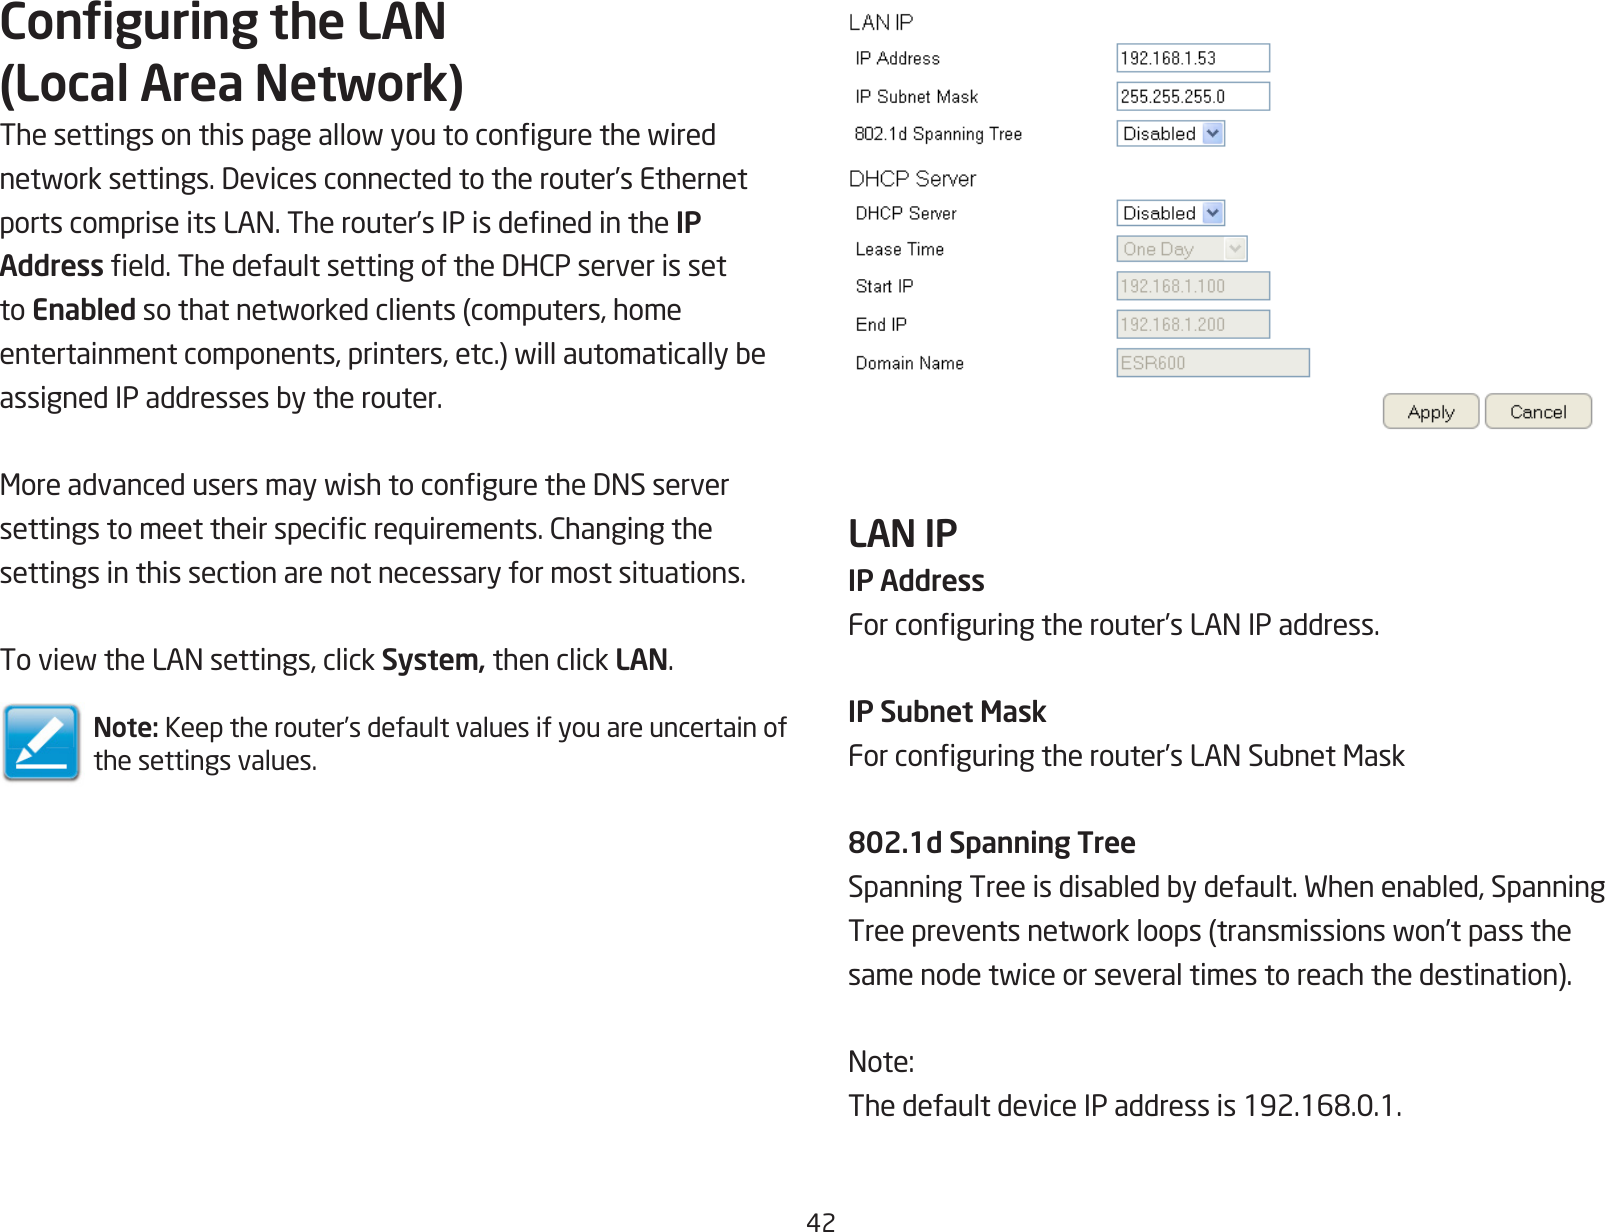 42Conguring the LAN (Local Area Network)Thesettingsonthispageallowyoutocongurethewirednetworksettings.Devicesconnectedtotherouter’sEthernetportscompriseitsLAN.Therouter’sIPisdenedintheIP Addresseld.ThedefaultsettingoftheDHCPserverissetto Enabledsothatnetworkedclients(computers,homeentertainmentcomponents,printers,etc.)willautomaticallybeassignedIPaddressesbytherouter.MoreadvancedusersmaywishtoconguretheDNSserversettingstomeettheirspecicrequirements.Changingthesettings in this section are not necessary for most situations.ToviewtheLANsettings,clickSystem, then click LAN.Note: Keep the router’s default values if you are uncertain of the settings values.LAN IP IP AddressForconguringtherouter’sLANIPaddress.IP Subnet MaskForconguringtherouter’sLANSubnetMask802.1d Spanning TreeSpanningTreeisdisabledbydefault.Whenenabled,SpanningTreepreventsnetworkloops(transmissionswon’tpassthesamenodetwiceorseveraltimestoreachthedestination).Note:ThedefaultdeviceIPaddressis192.168.0.1.